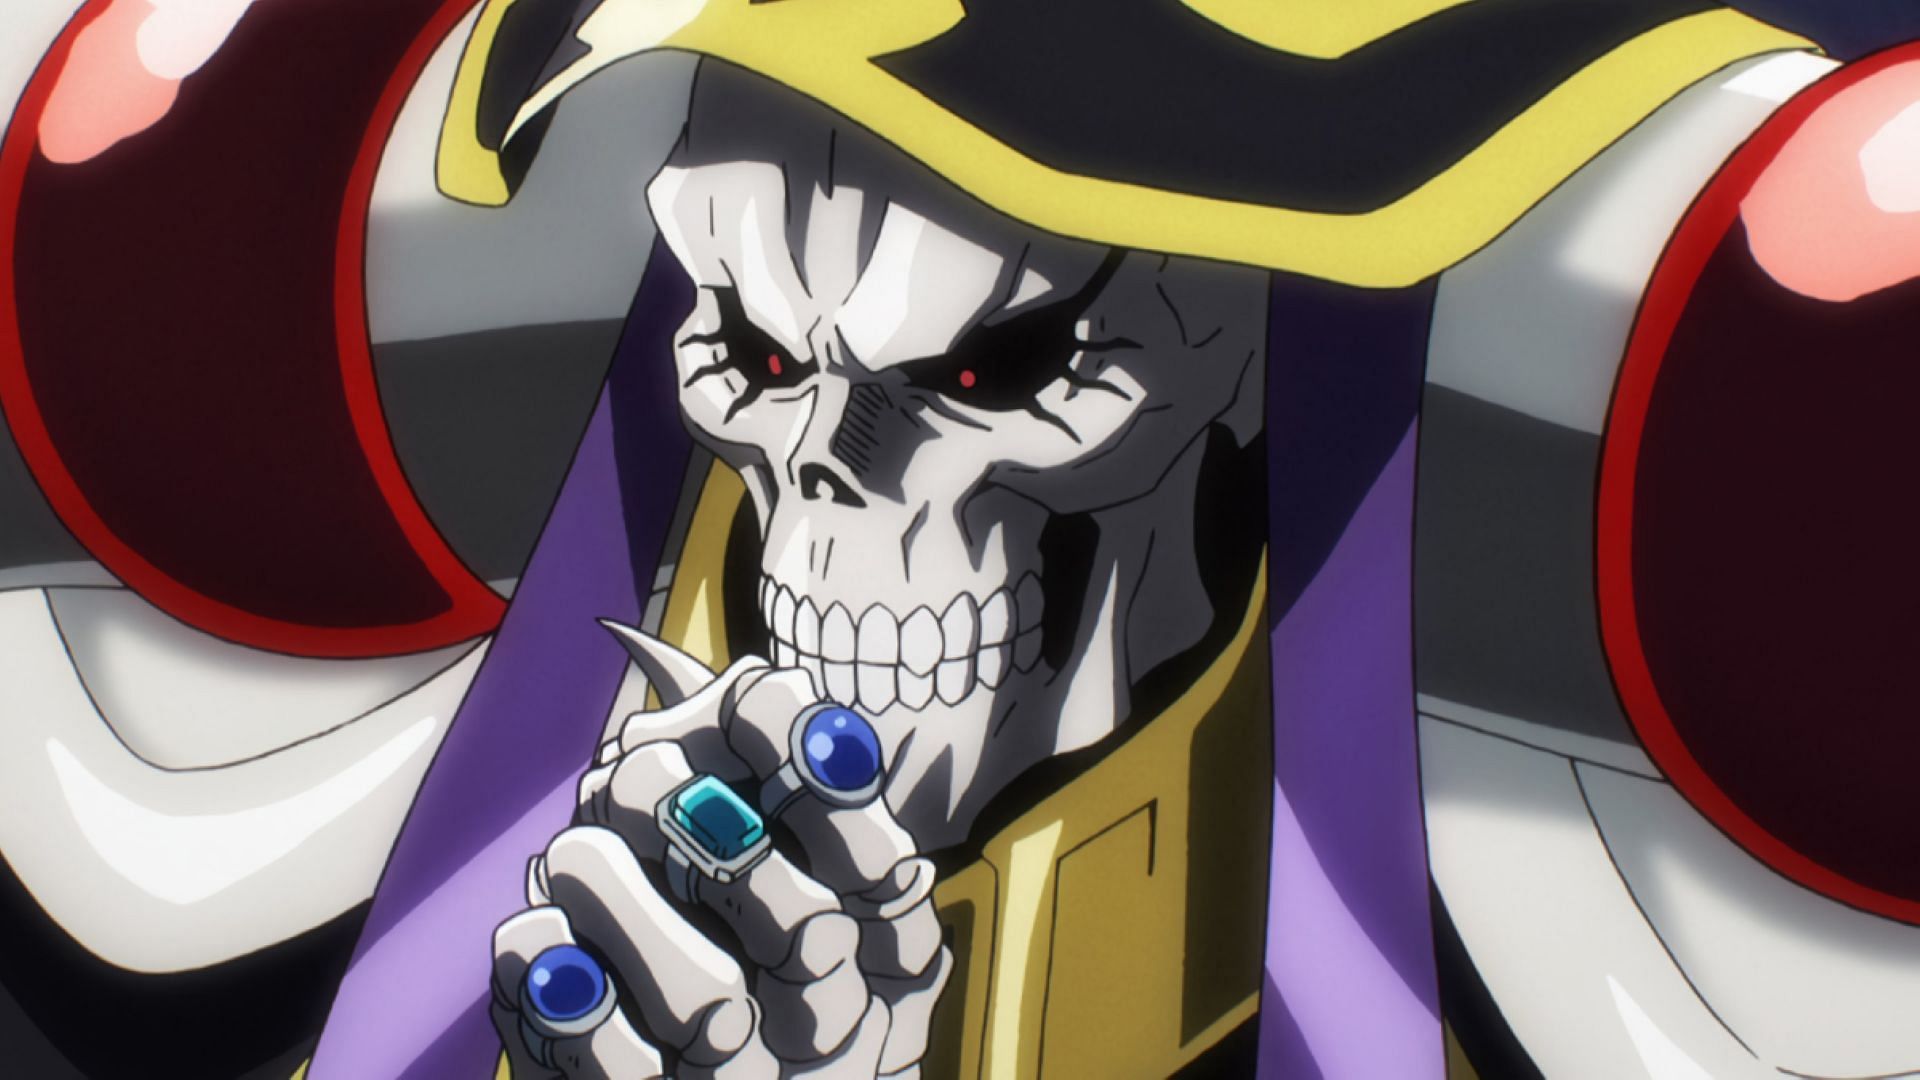 The lich protagonist, Ainz Ooal Gown, thinking. (Image via Studio Madhouse)